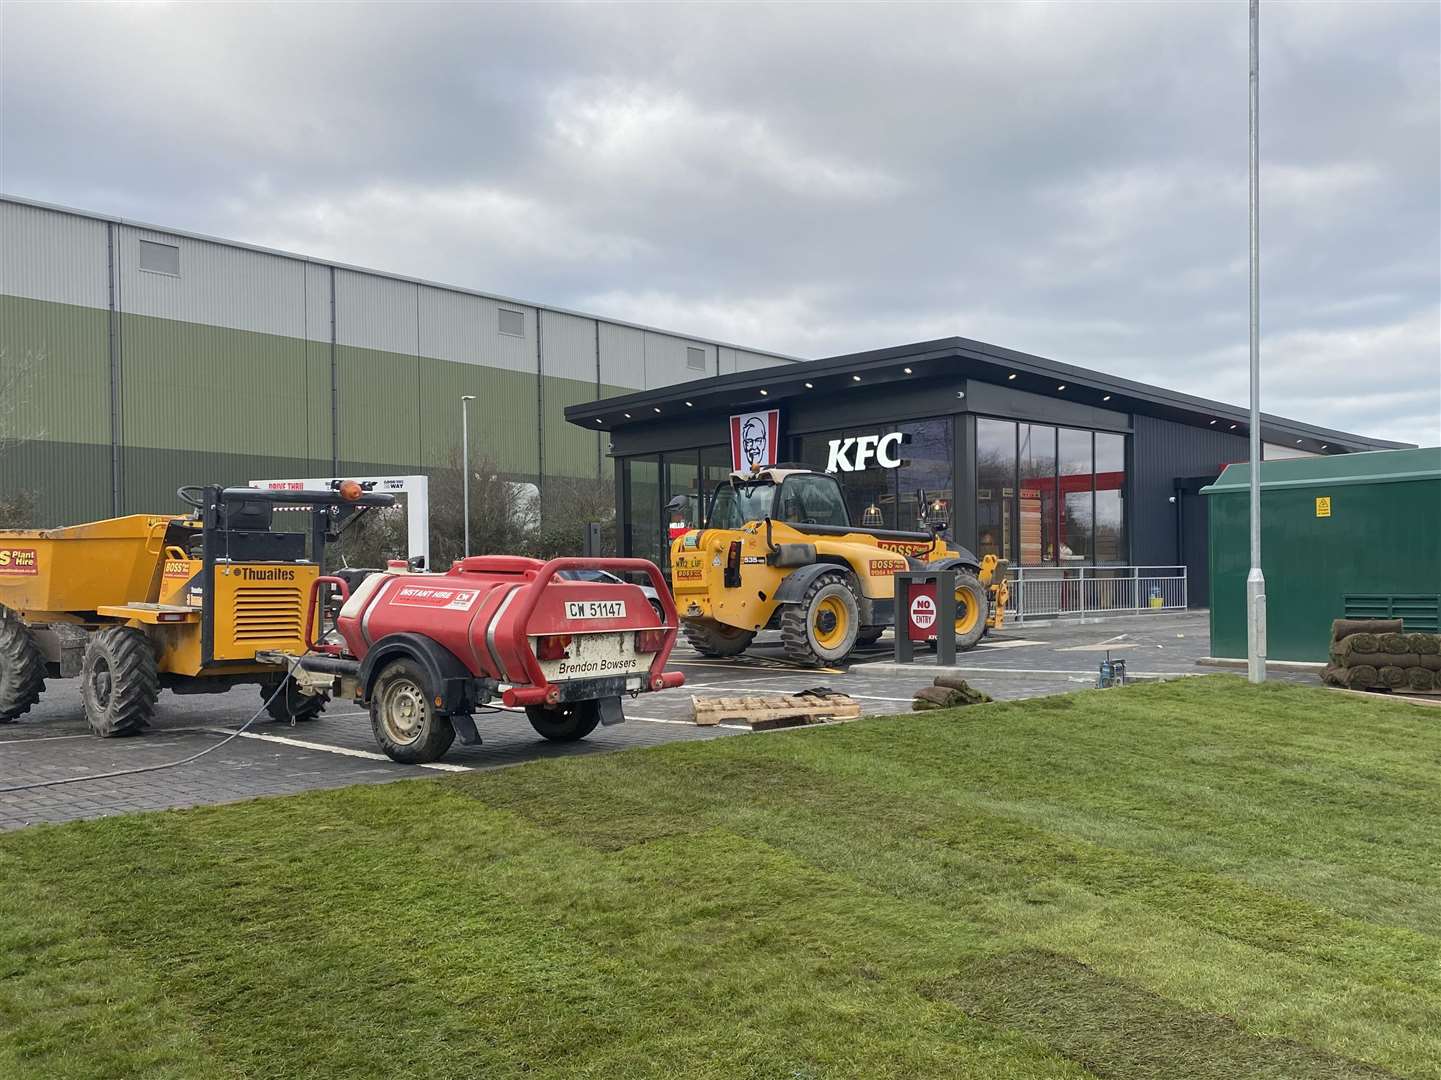 Work to finish the new KFC is ongoing